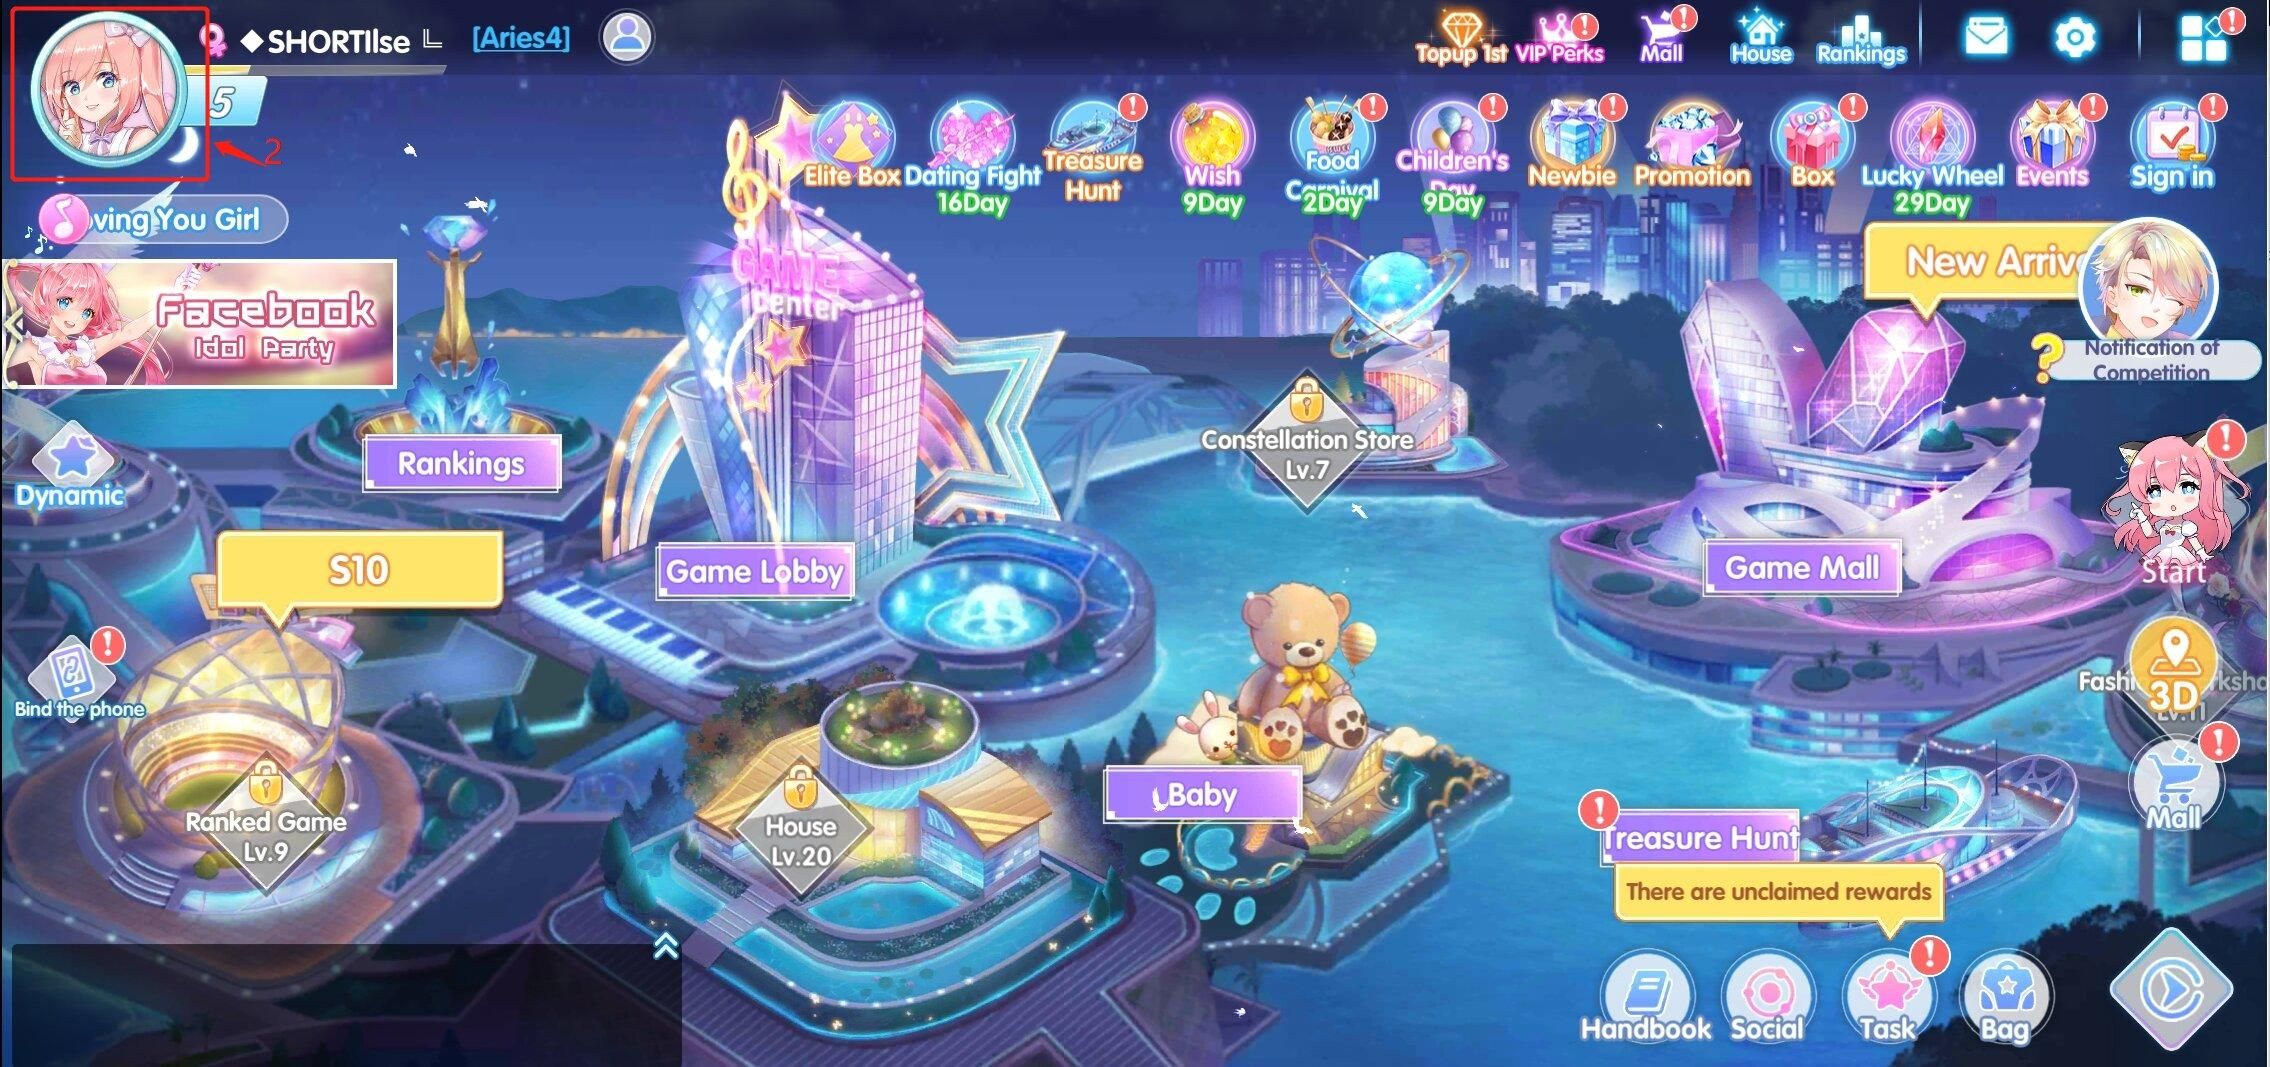 How to top-up Idol Party Diamonds - BitTopup